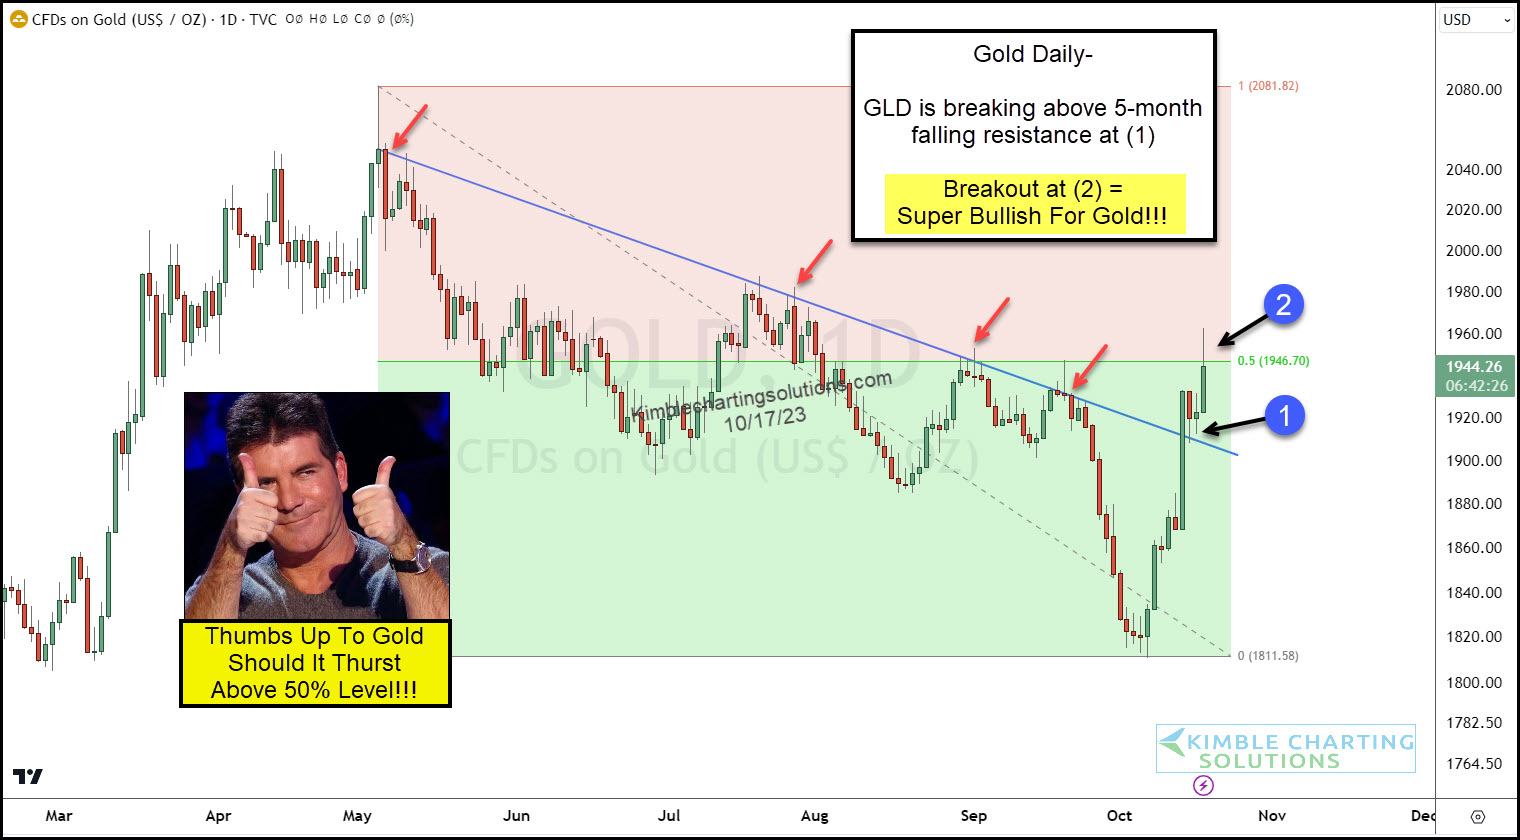 CFDs on Gold-Daily Chart